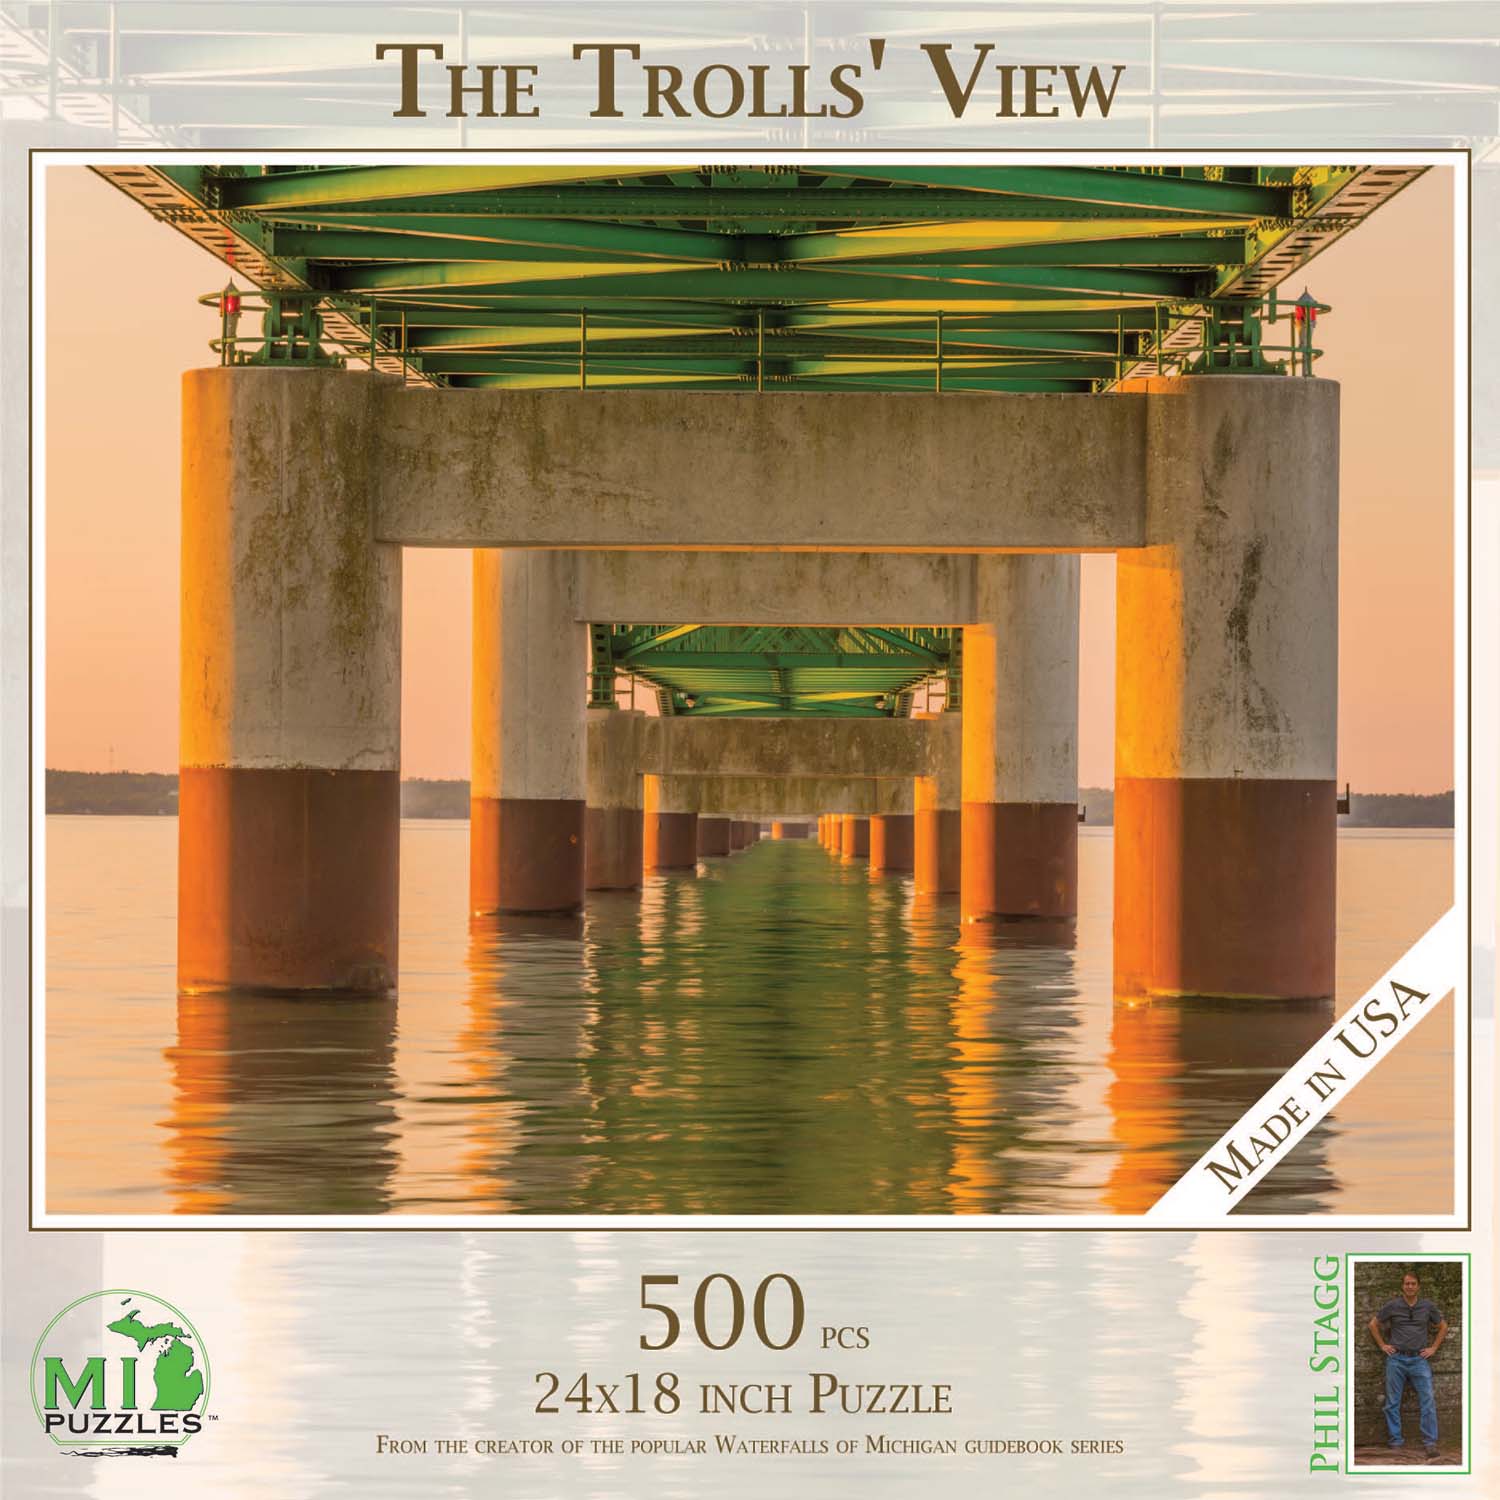 The Trolls' View Photography Jigsaw Puzzle